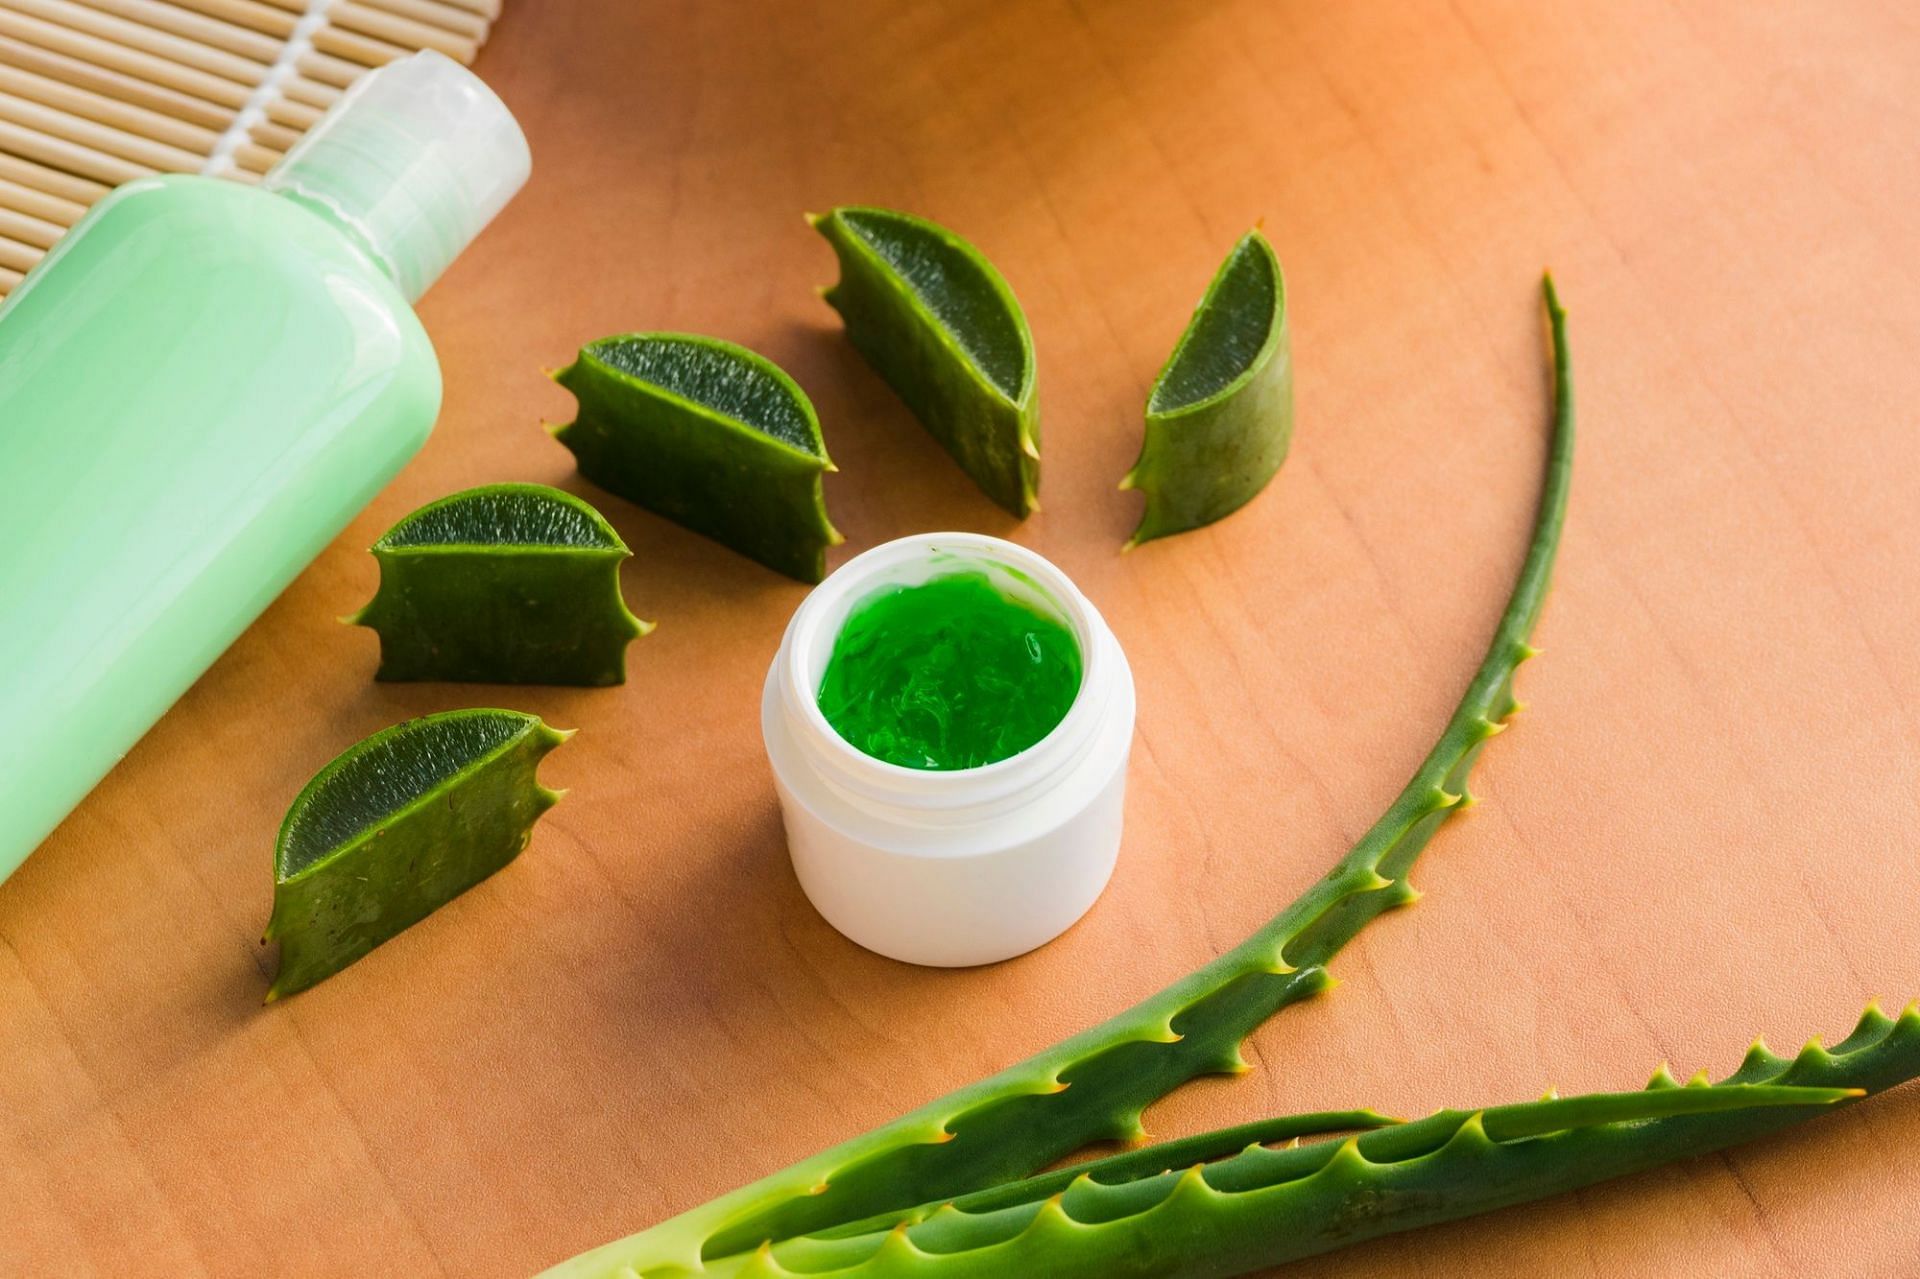 Is aloe vera good for your face? Aloe benefits for skin and acne. (Image via Freepik)